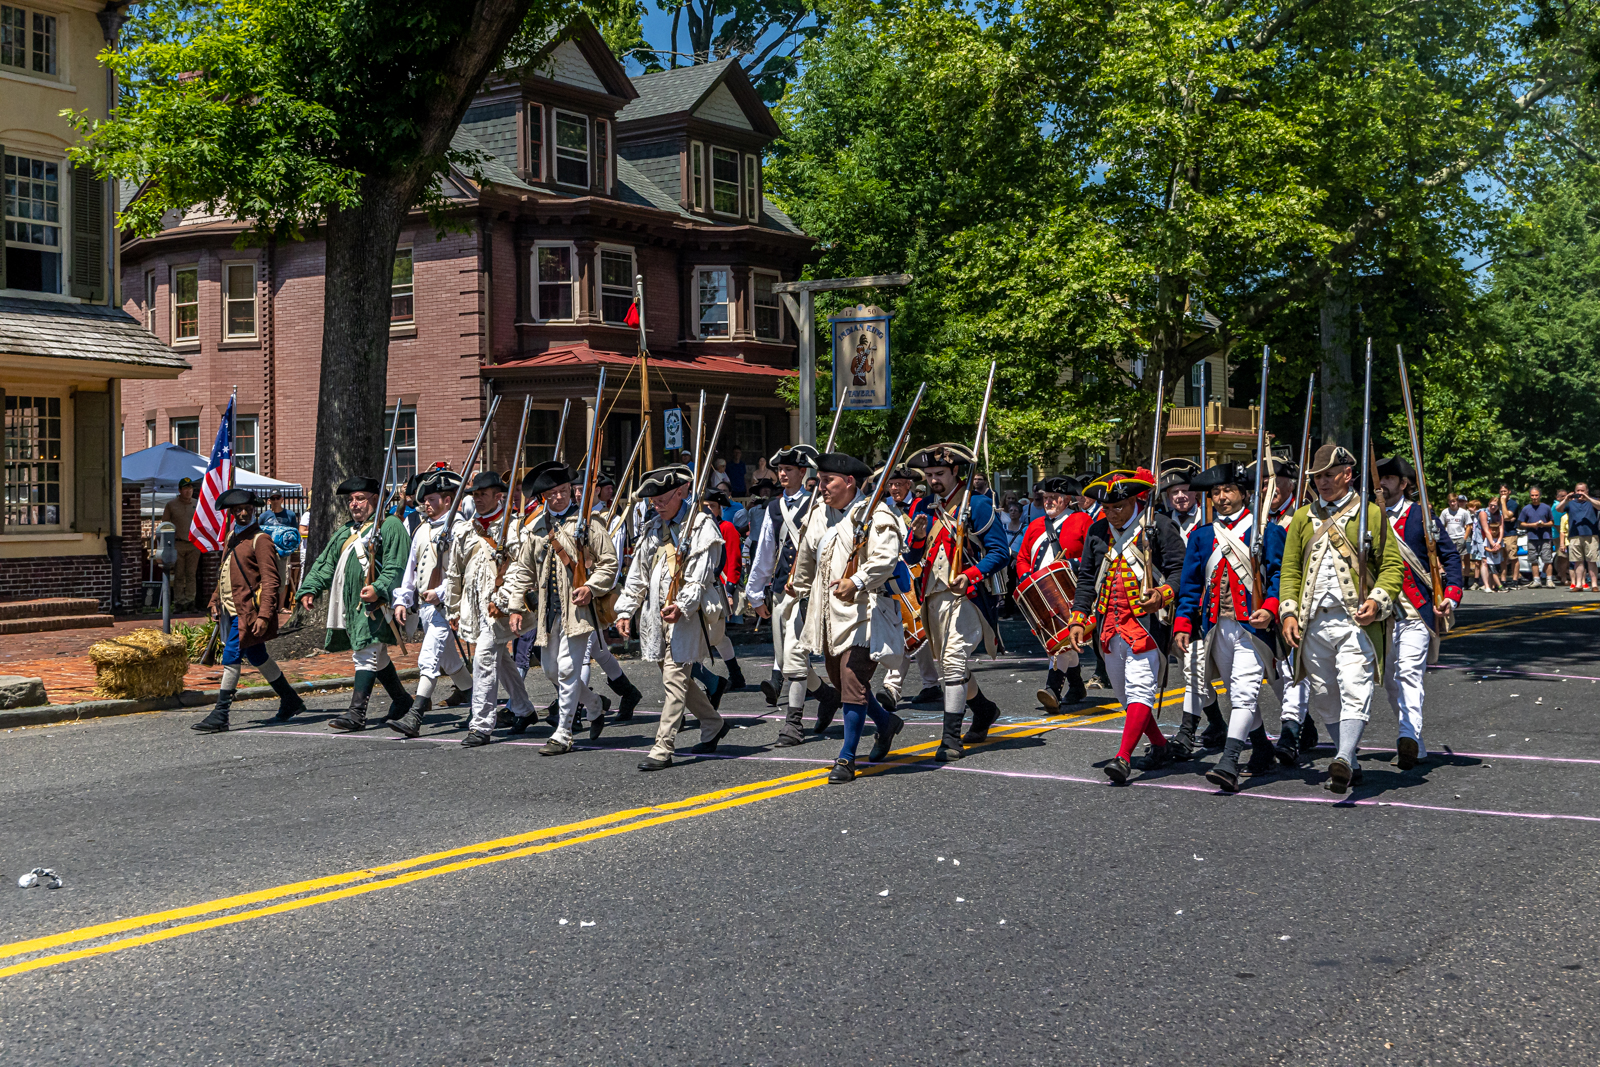 Colonials Marching down the Street